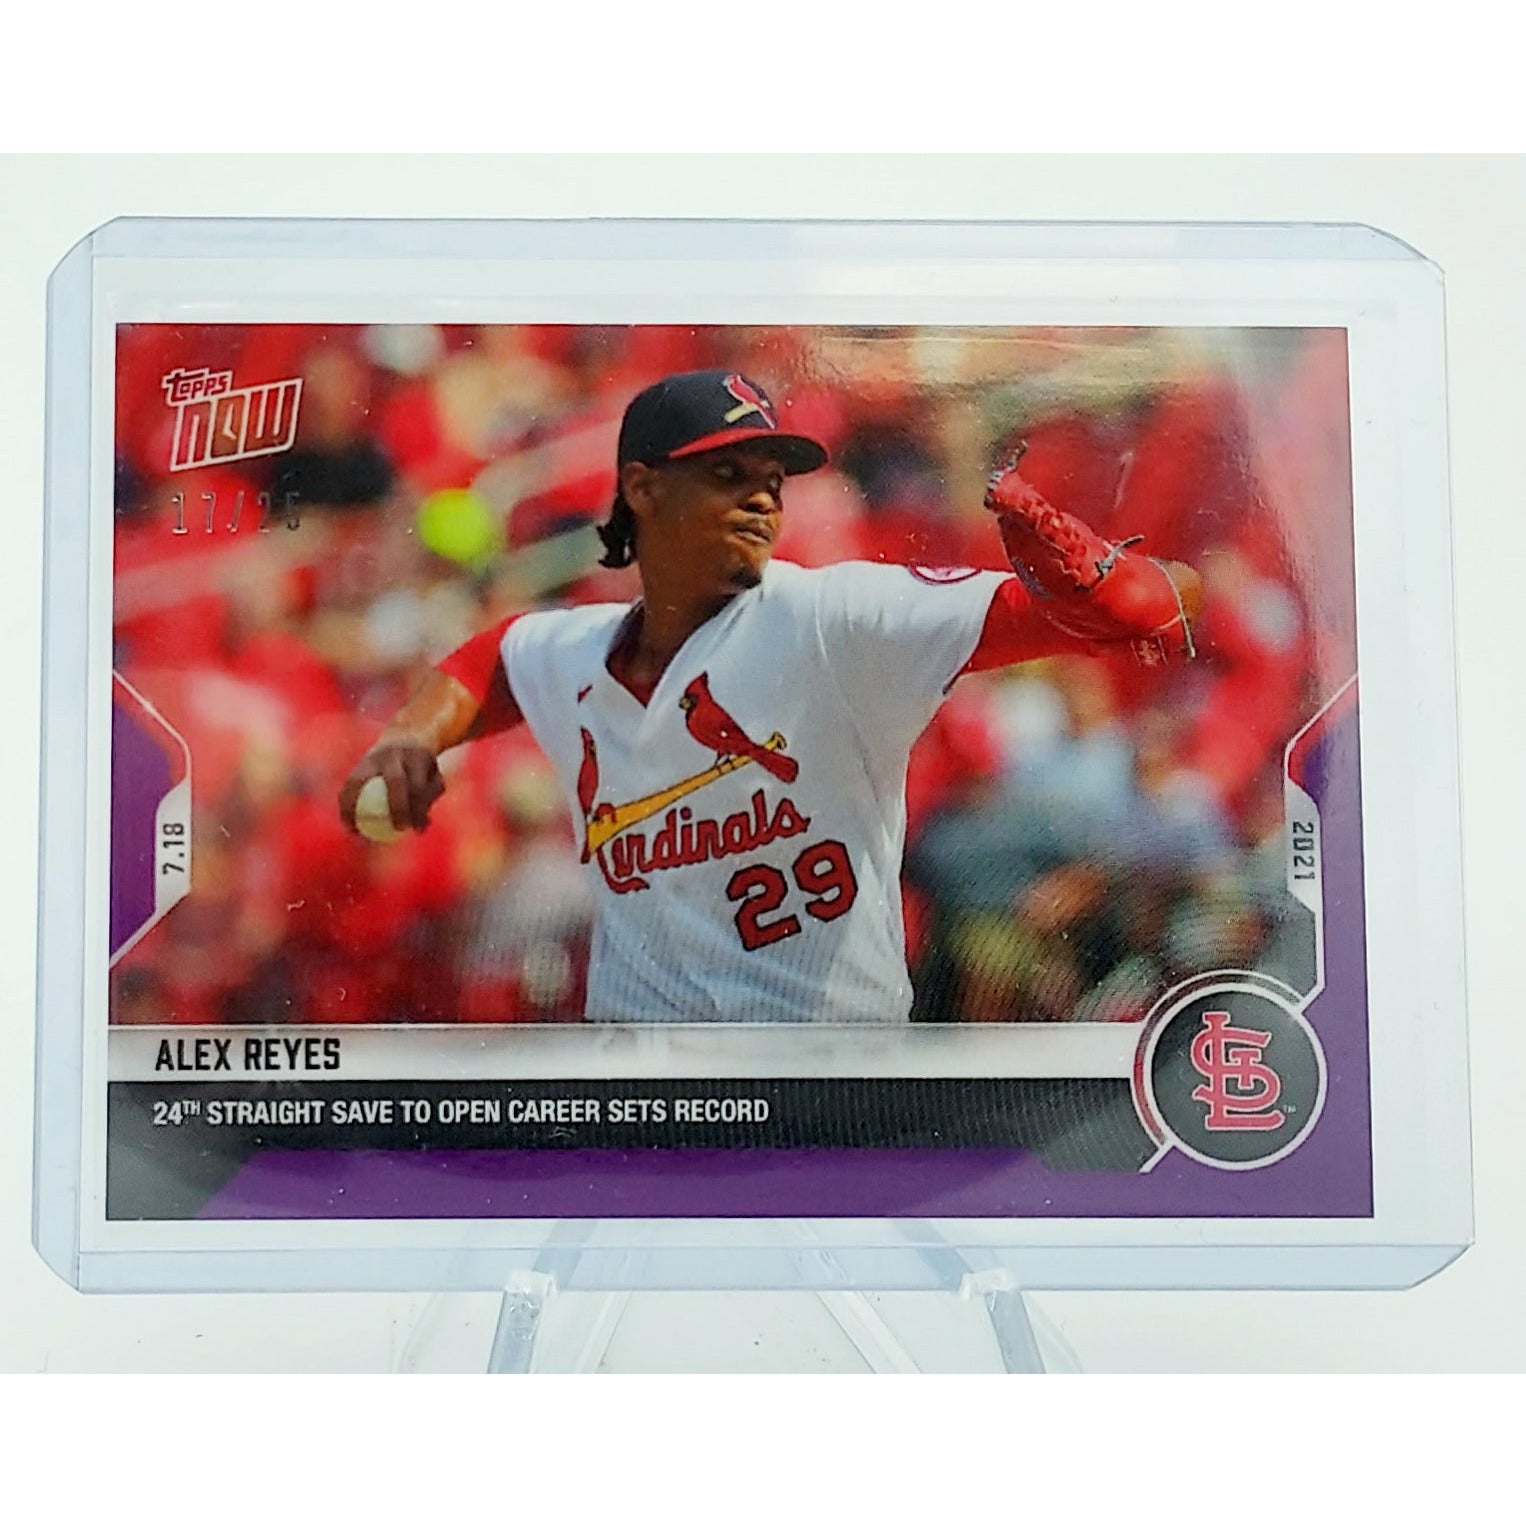 Alex Reyes 24 Straight Saves - 2021 MLB TOPPS NOW Card 523 Purple Parallel 17/49